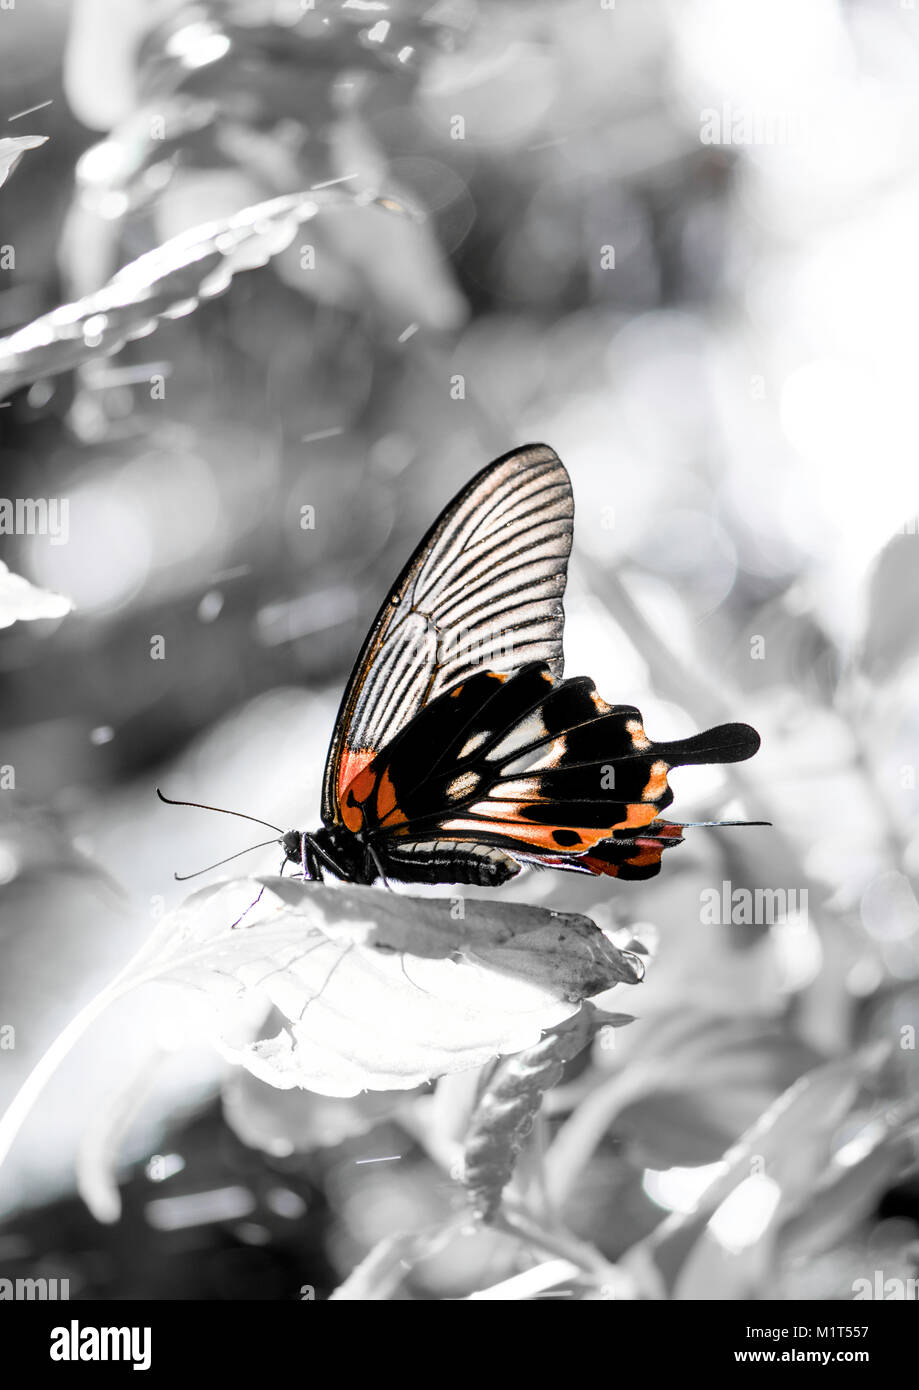 Portrait format, orange and black butterfly against a grey background. Stock Photo